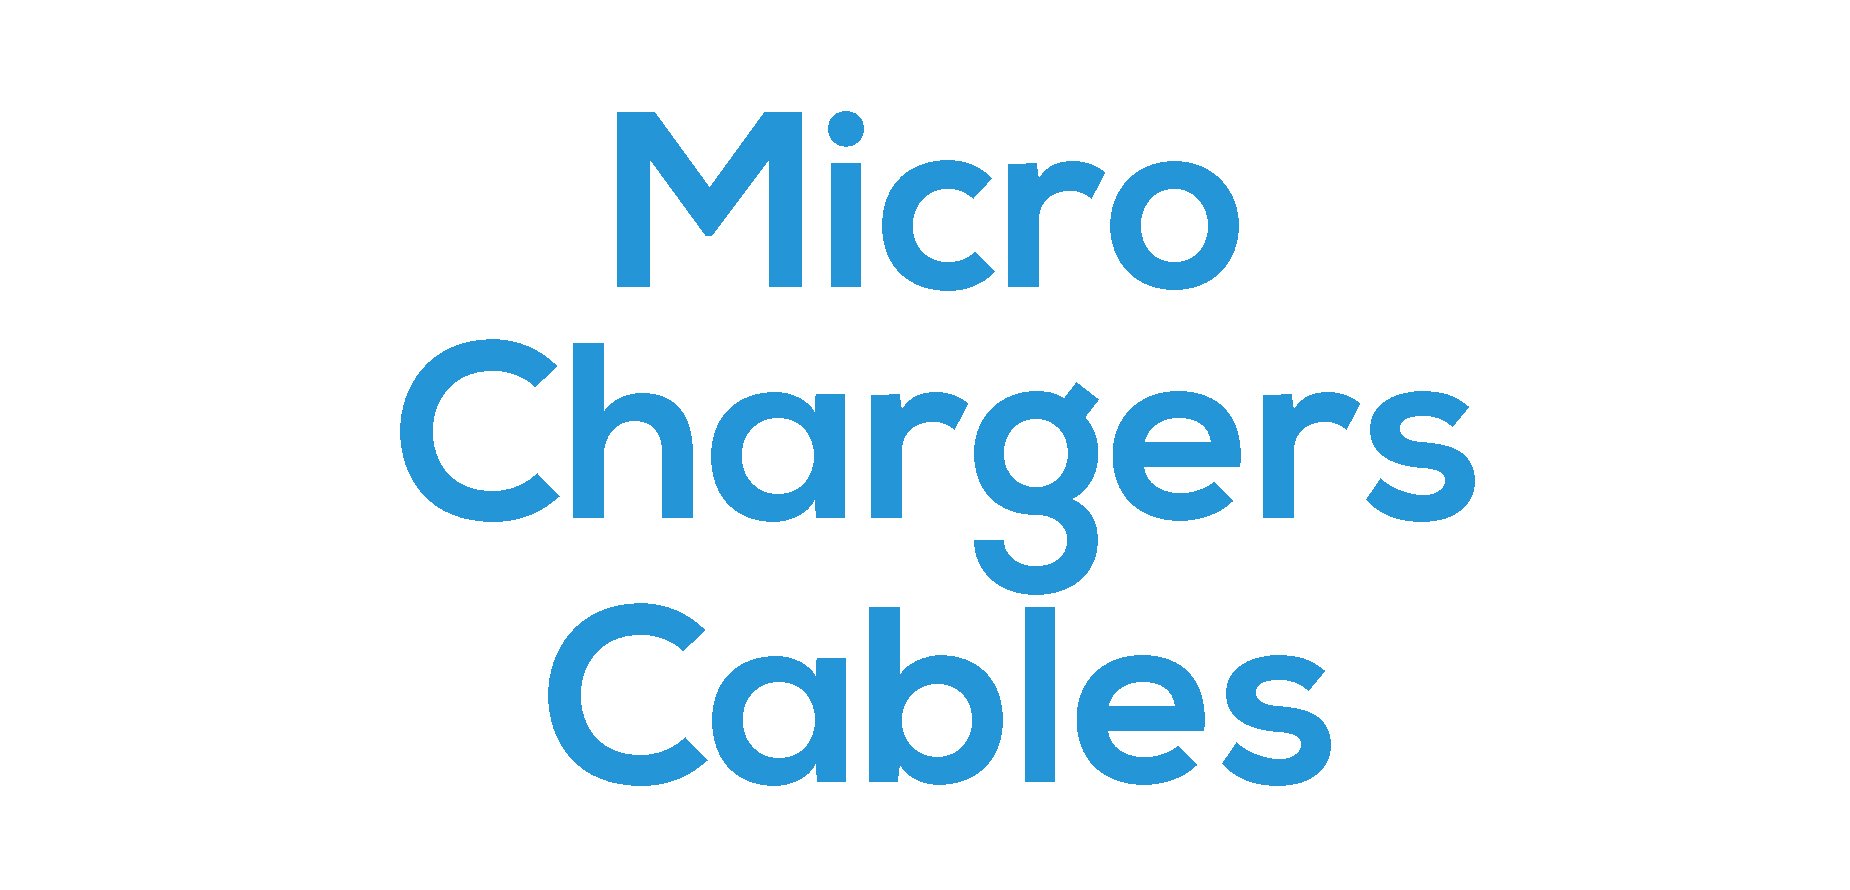 Micro Chargers / Cables